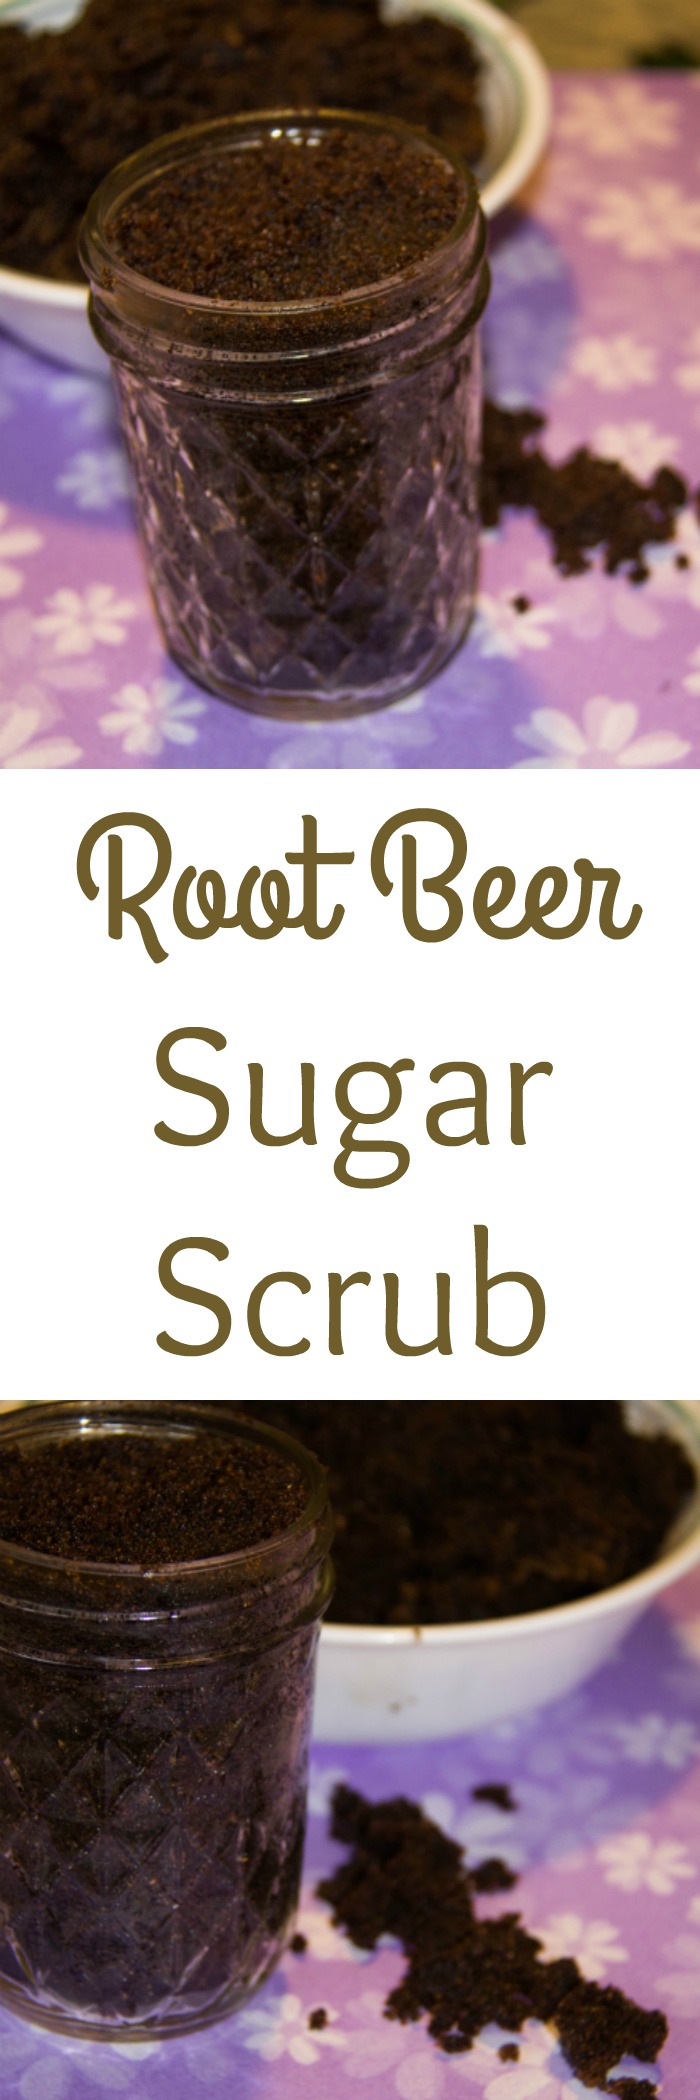 Looking to make a fun sugar scrub. Root Beer Sugar scrub is 3 ingredients, easy to make in 5 minutes and leaves your skin silky soft.